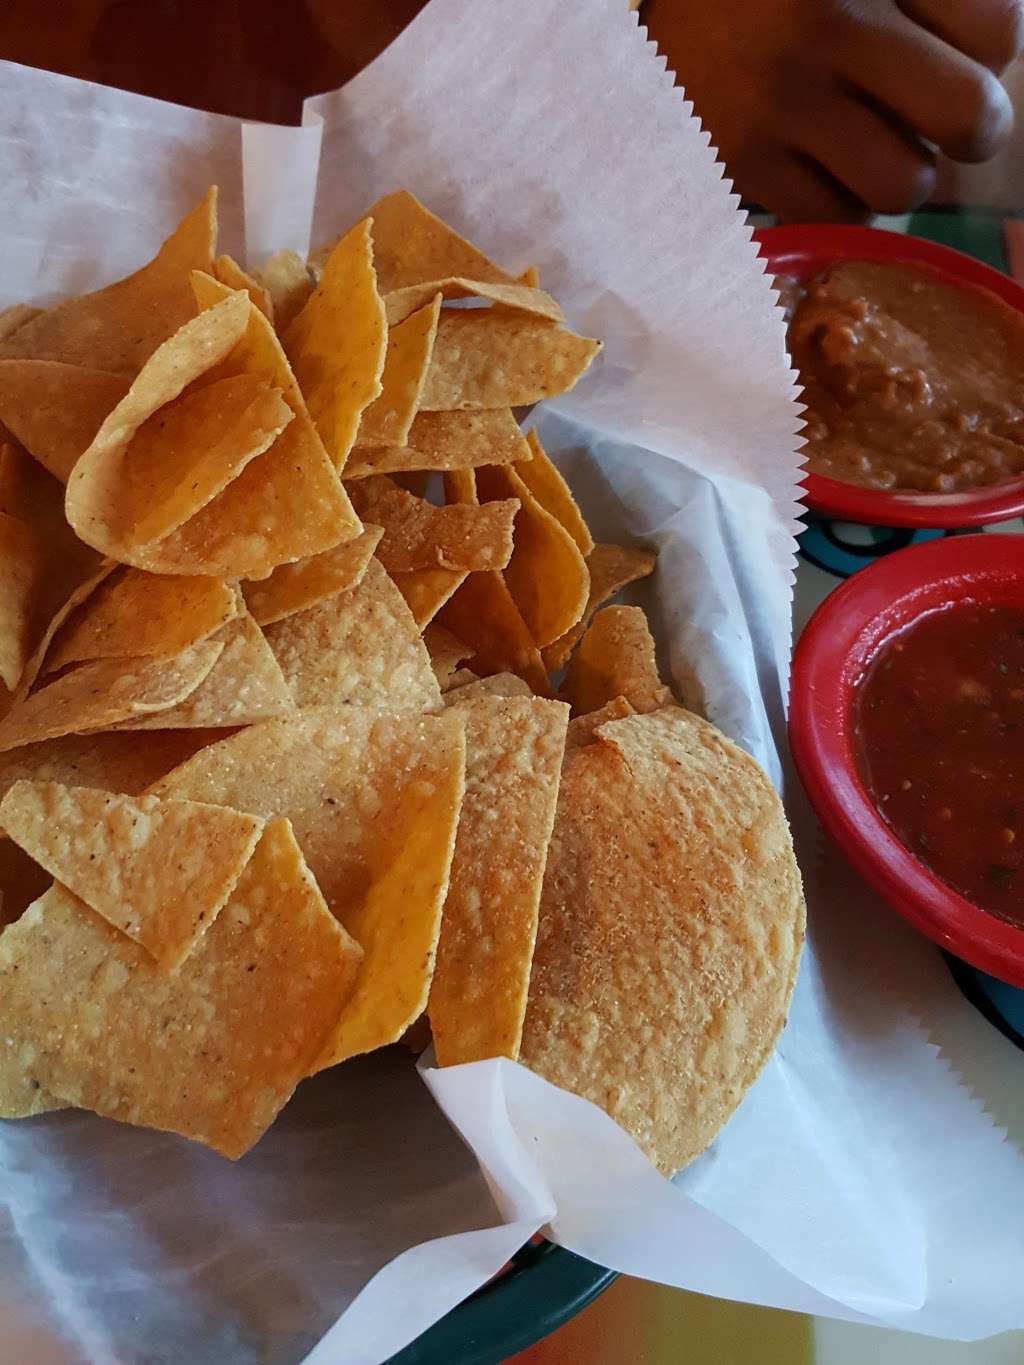 El Paso Mexican Restaurant | 1709 N Center St, Hickory, NC 28601 | Phone: (828) 322-6292